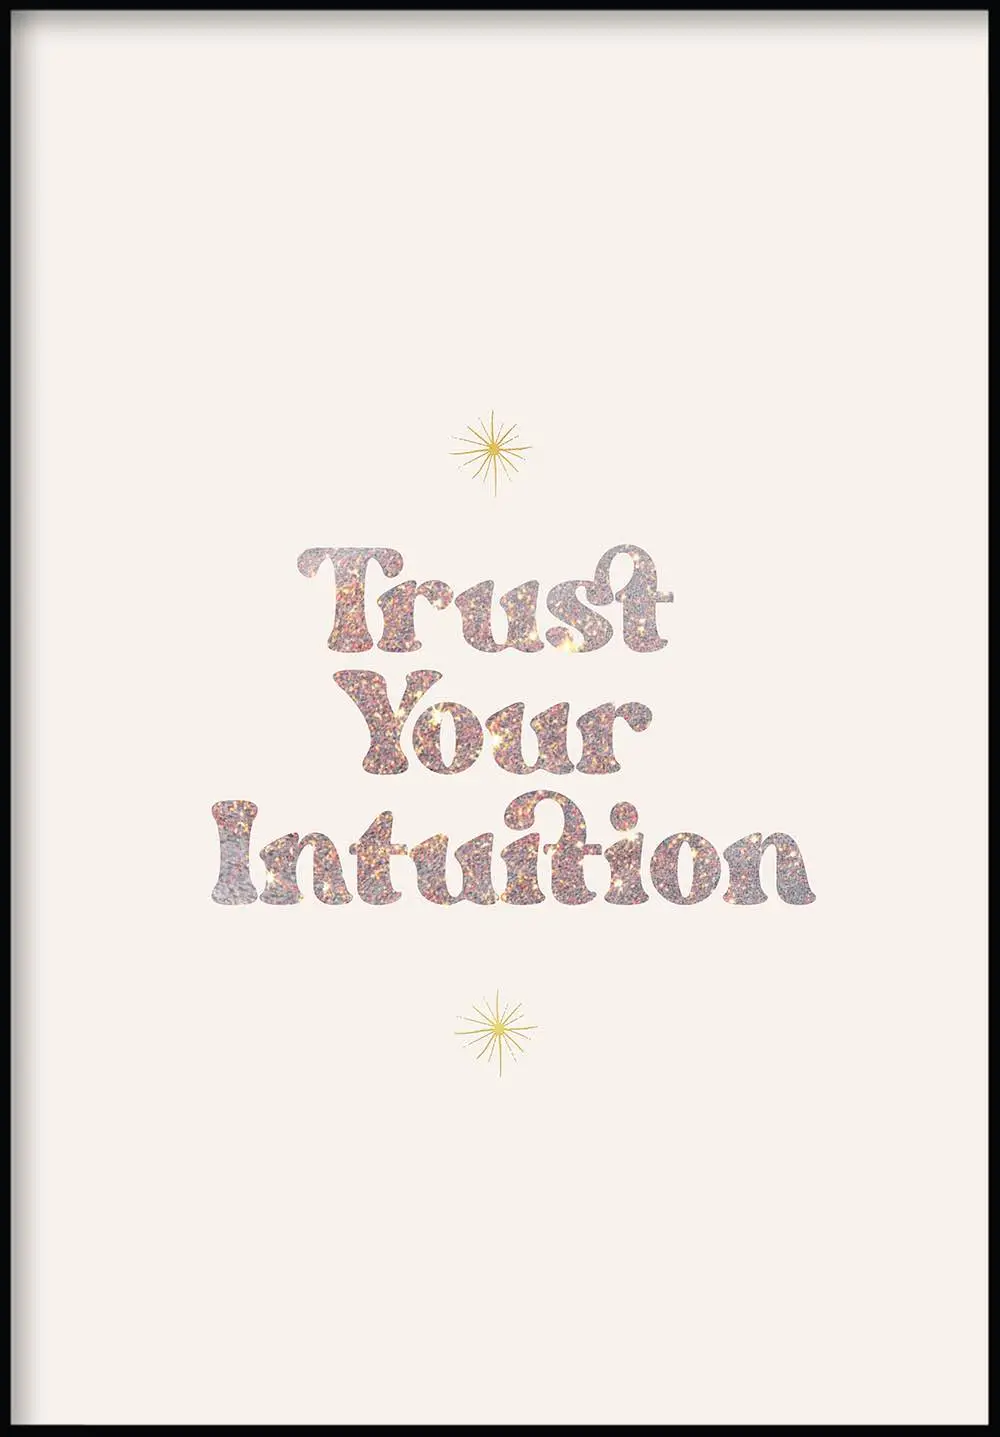 Vertraue Intuition Poster